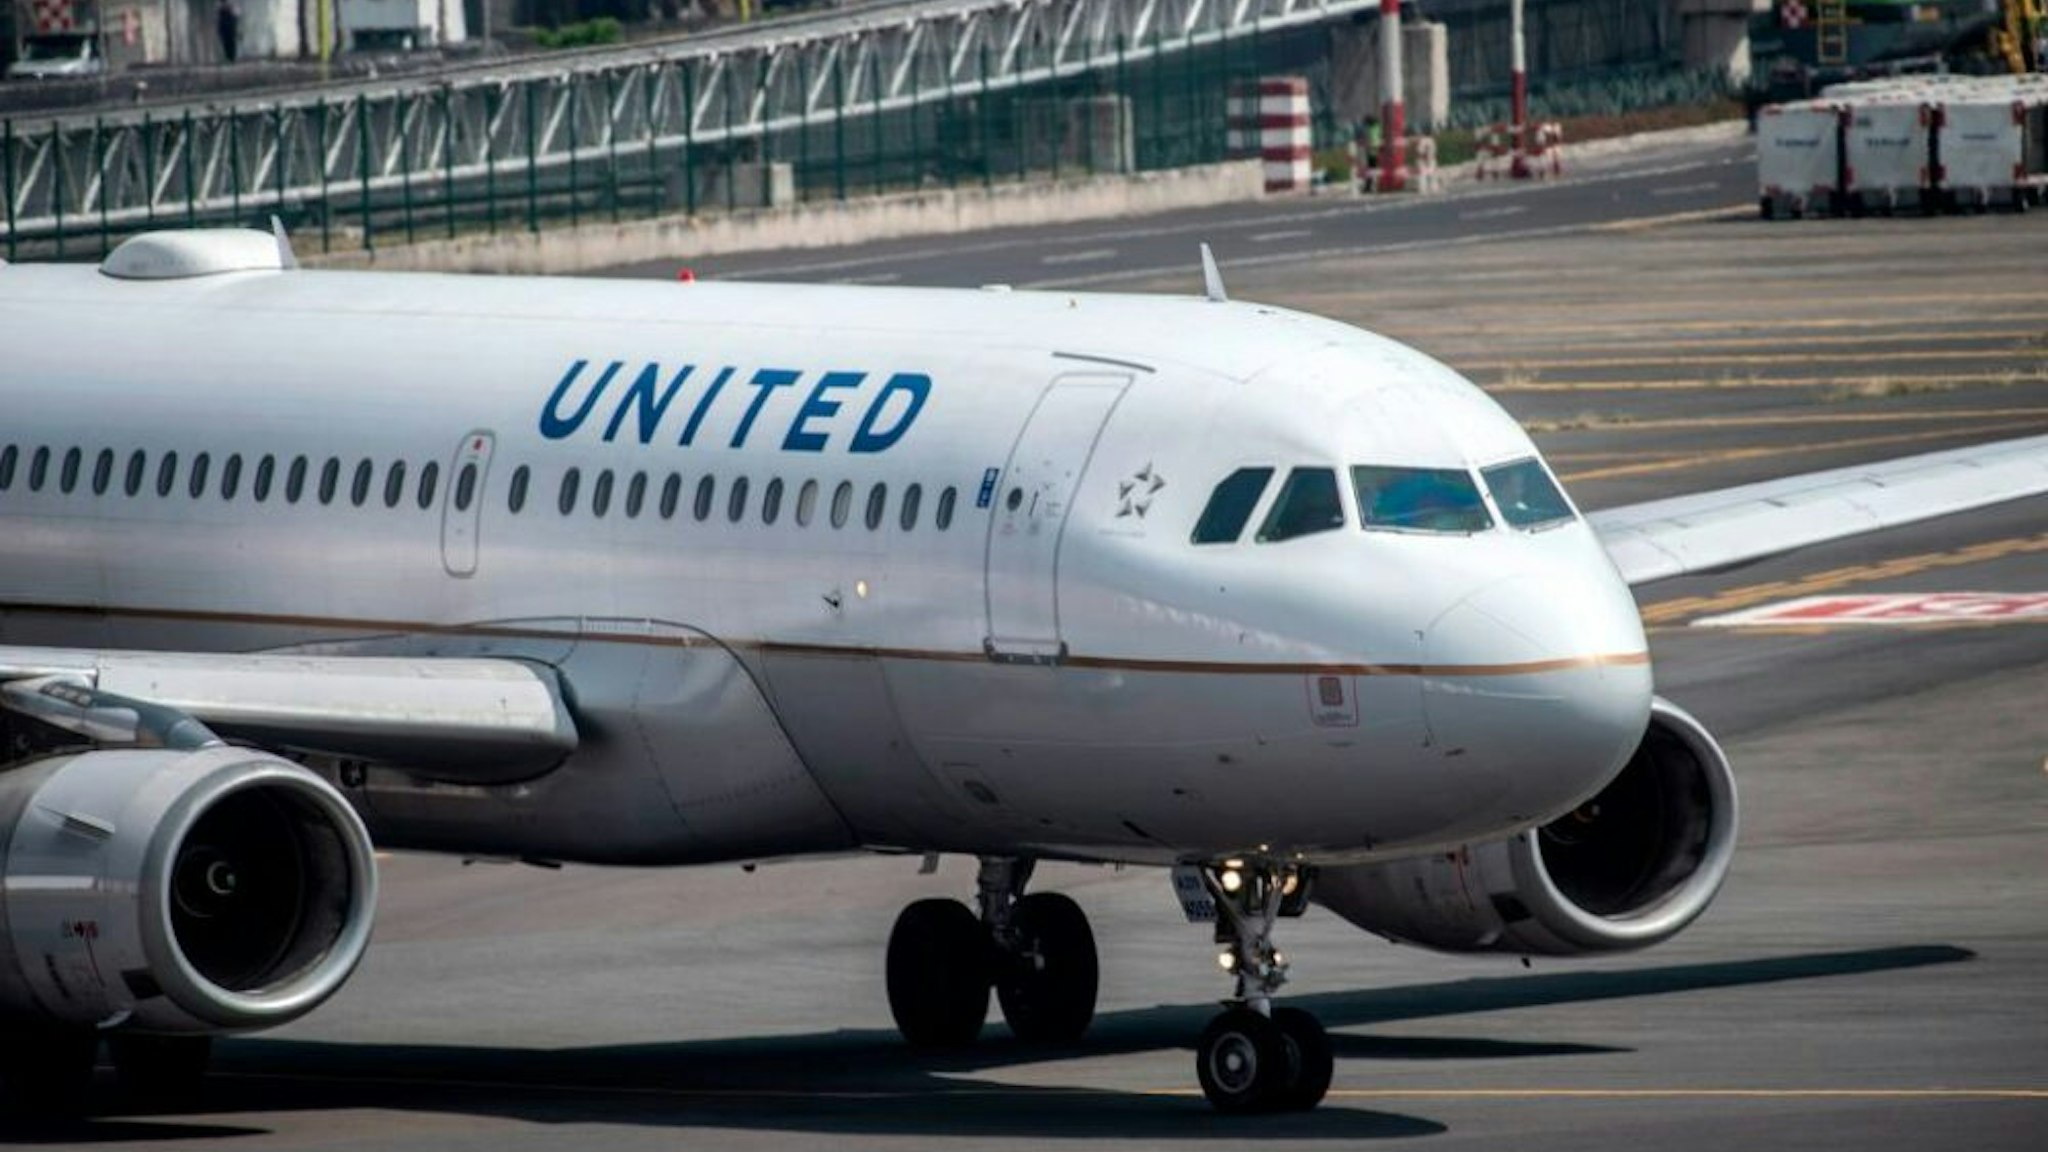 A United Airlines plane prepares to take off at the Benito Juarez International airport in Mexico City, on March 20, 2020. - International flights keep operating in Mexico, unlike most other countries which have closed airports due to the outbreak of the new coronavirus, COVID-19.